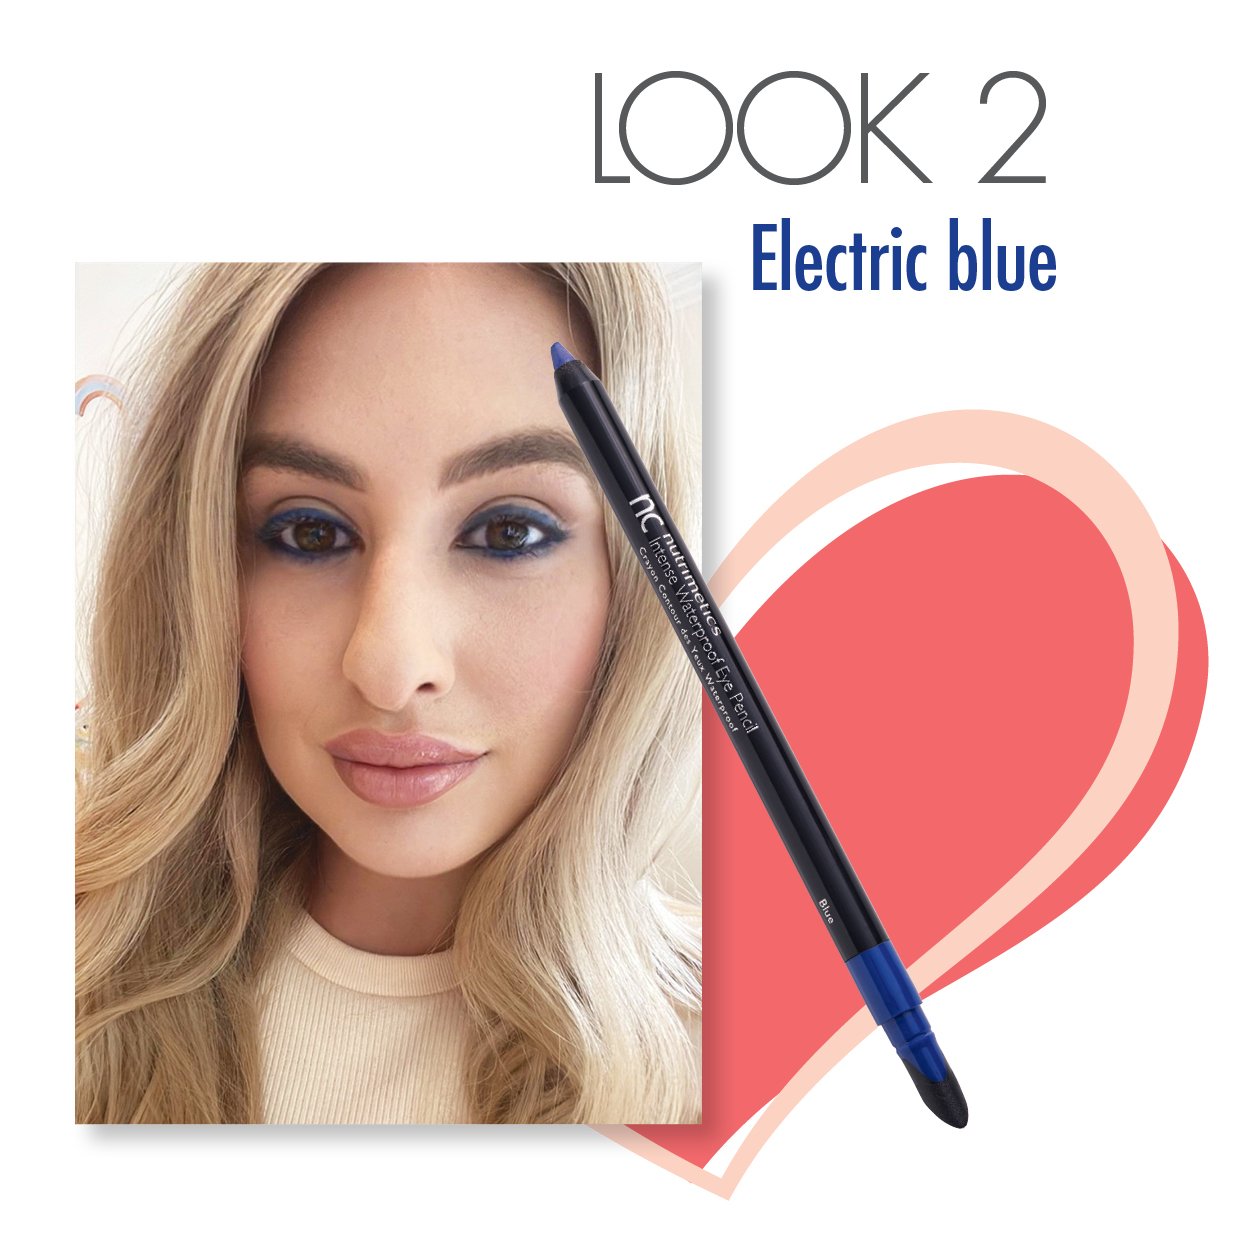 Look 2 electric blue